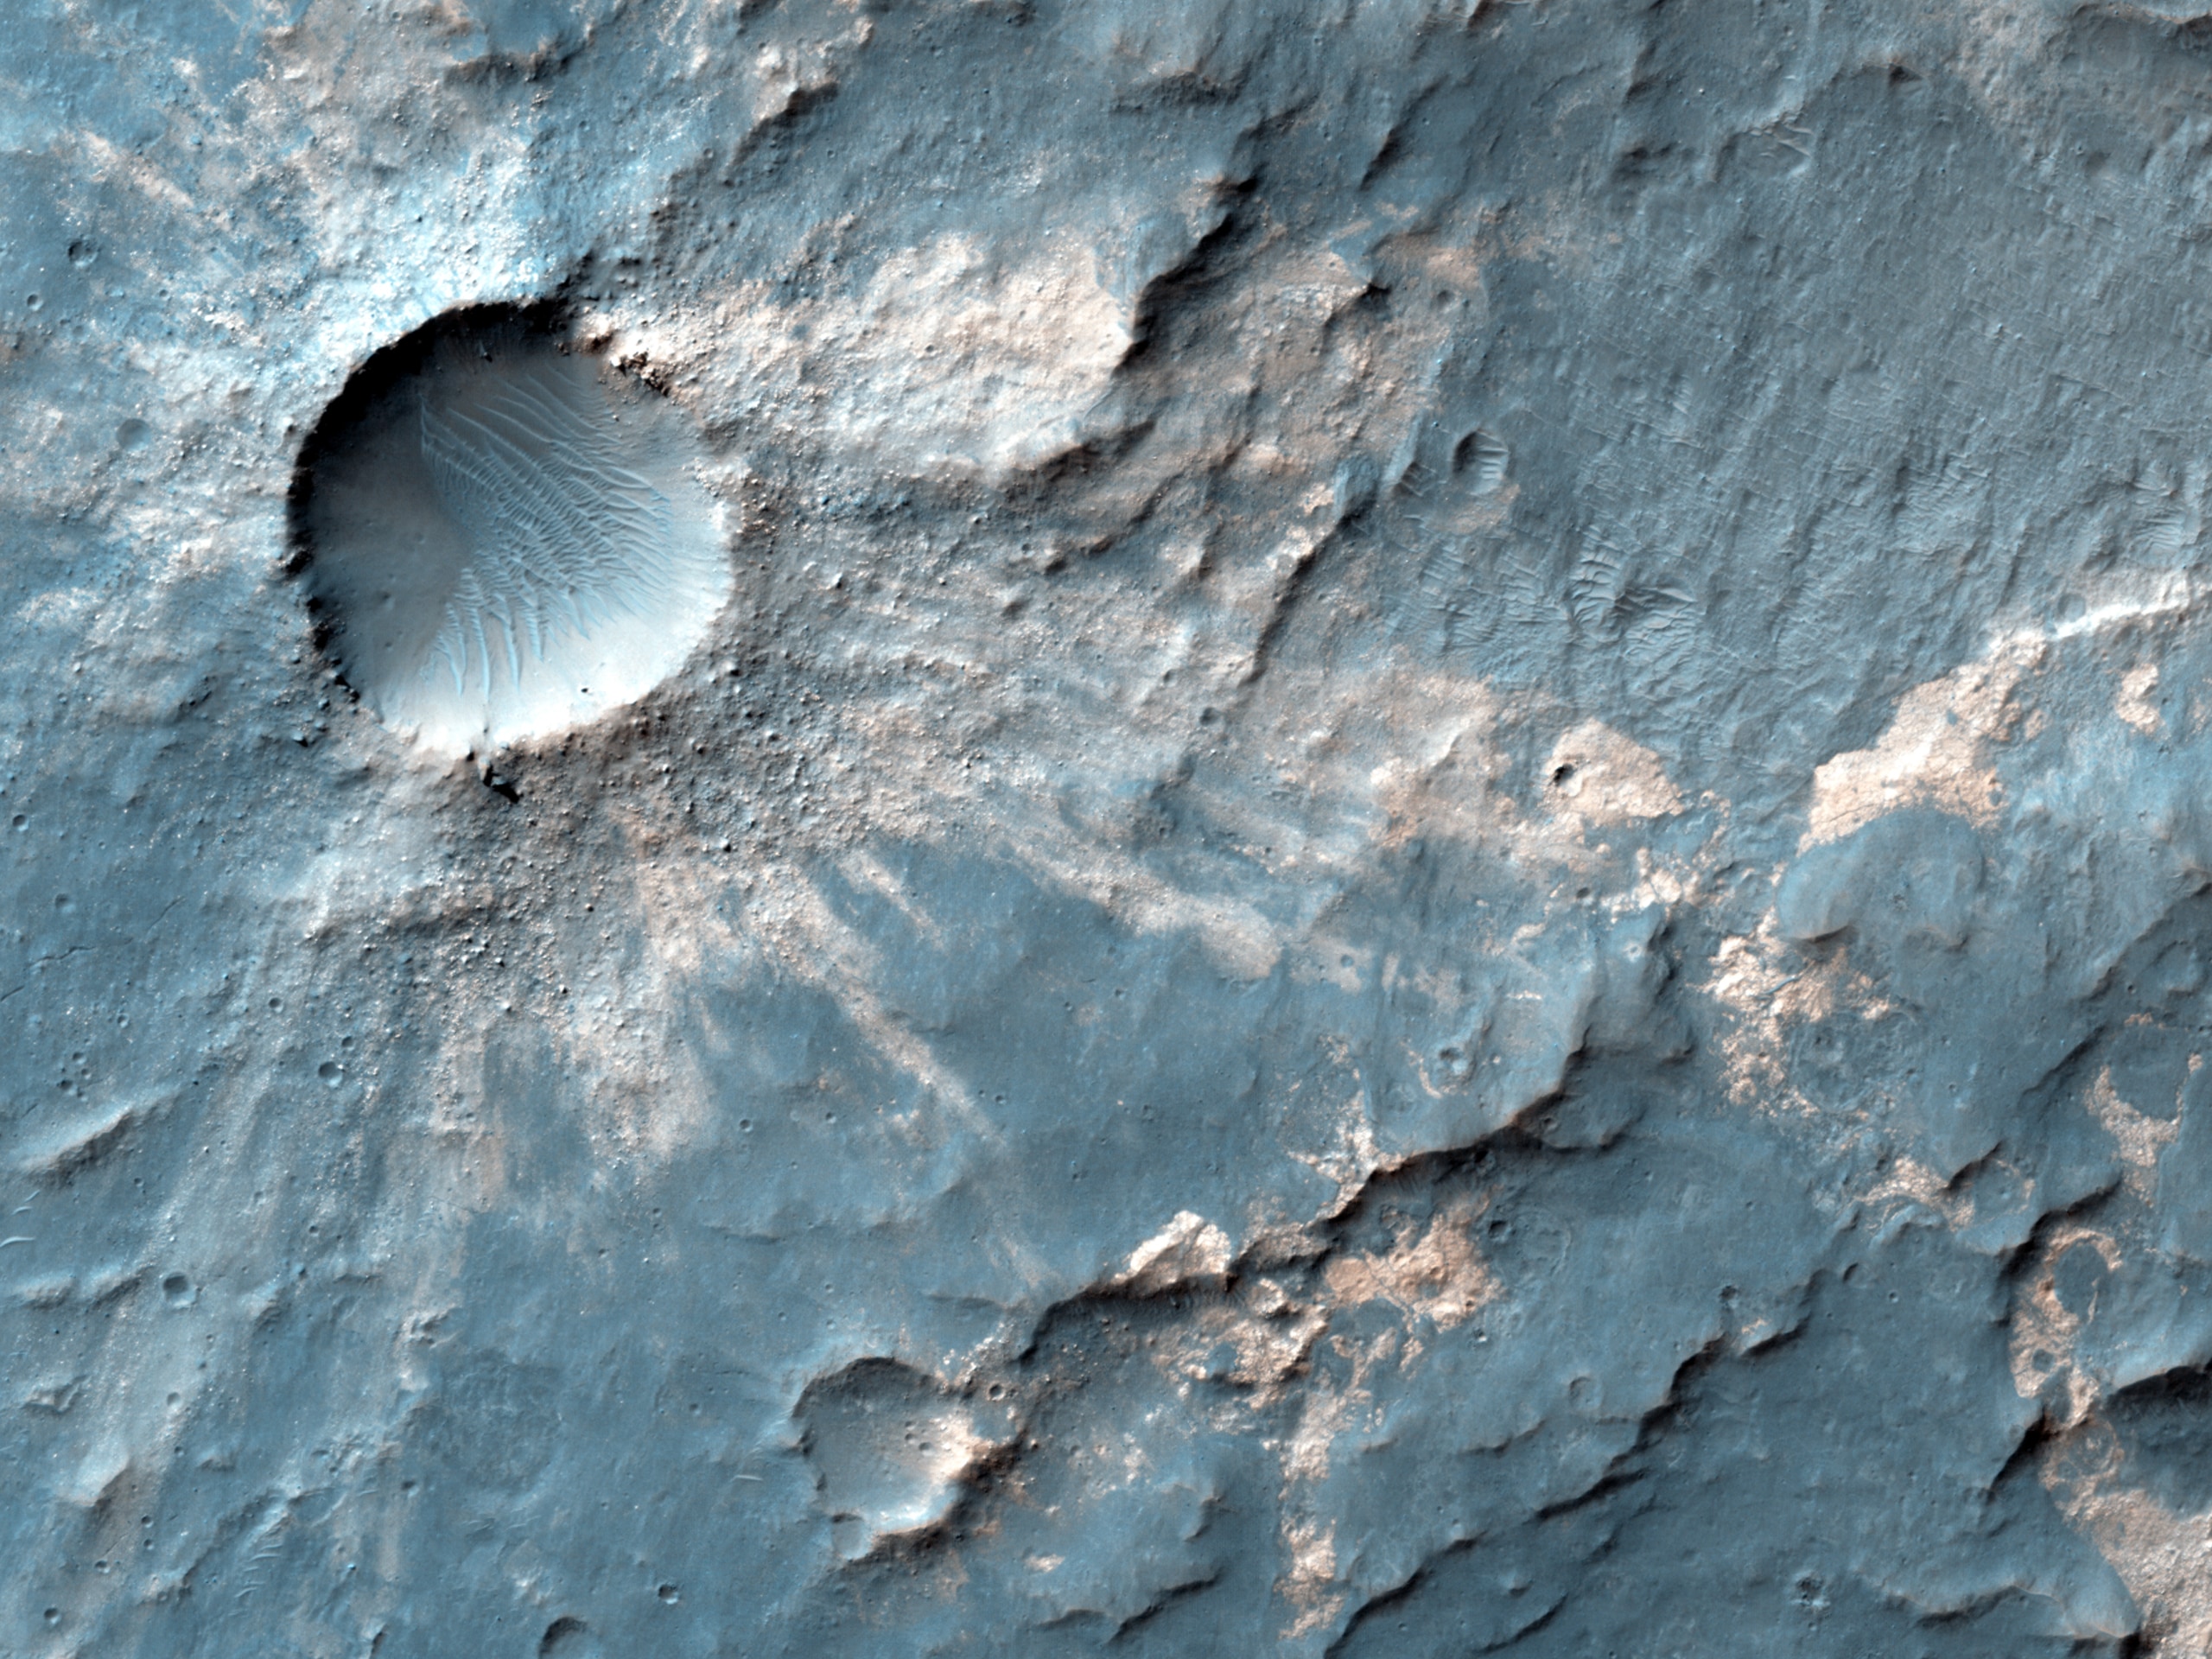 Craters within Craters